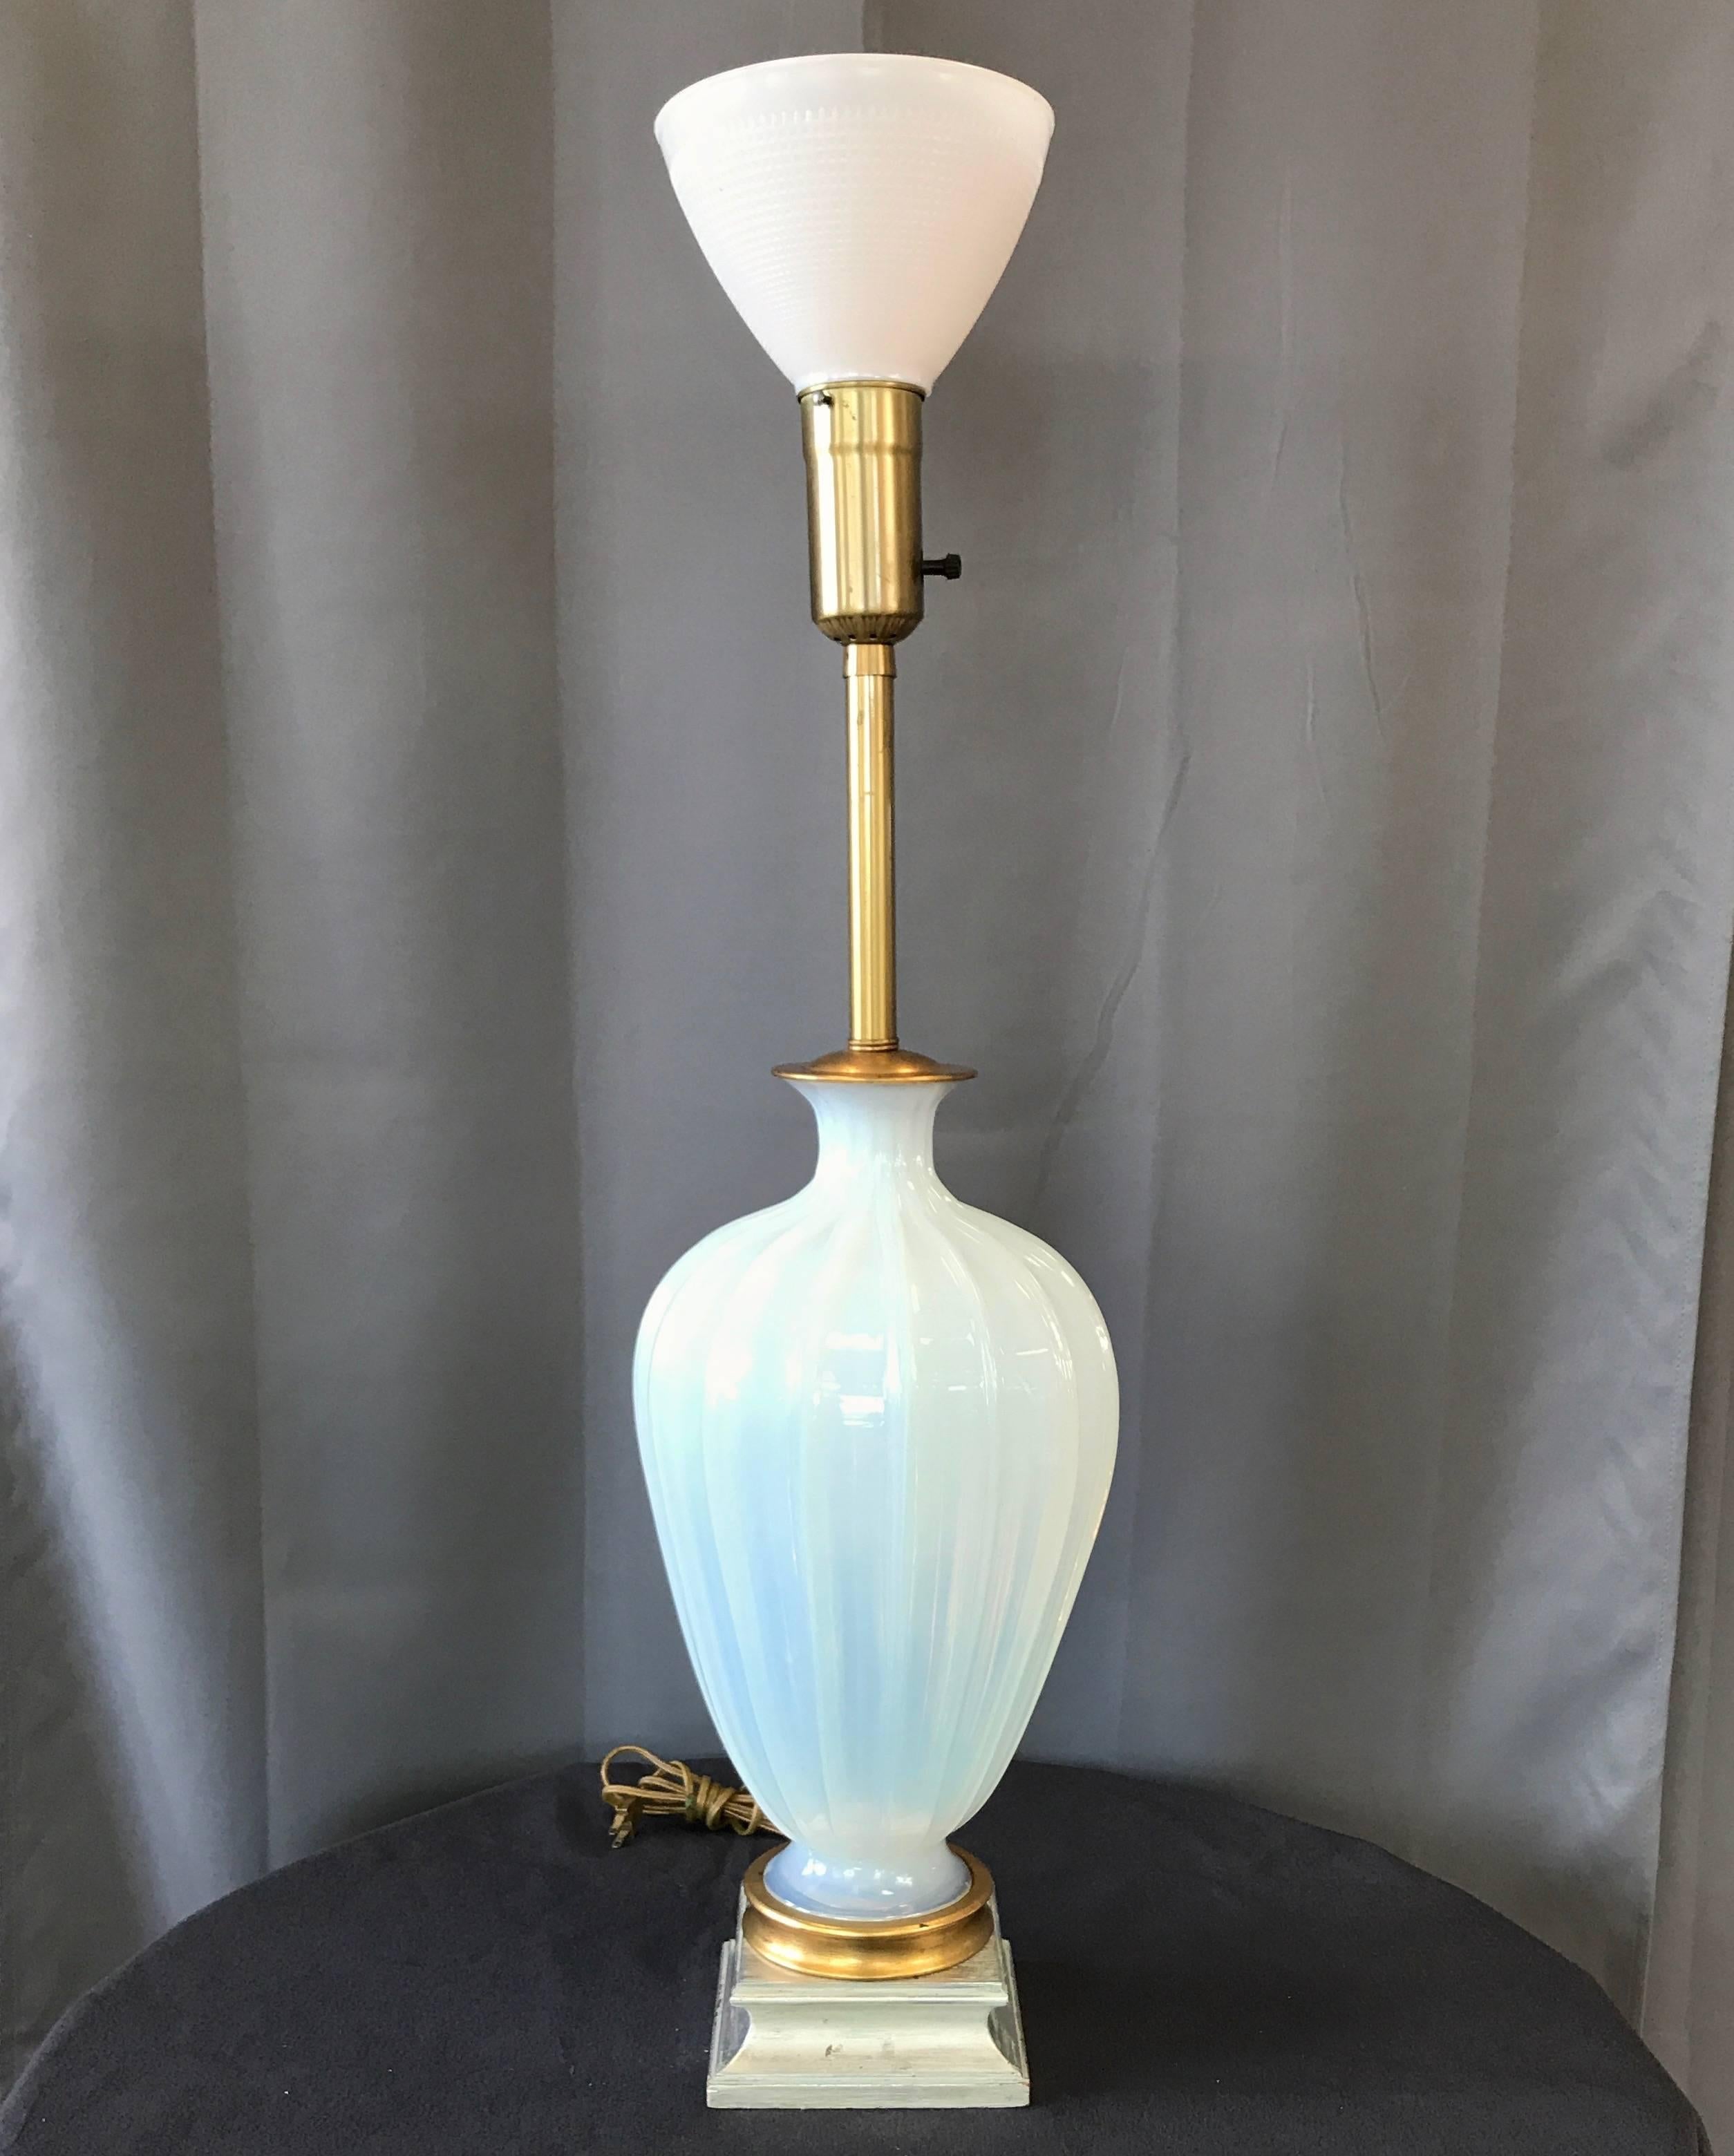 A statuesque Murano glass opaline table lamp with gold and silver accents by Seguso for Marbro Lamp Company.

Elegant and ethereal handblown ribbed body in semi-opaque and milky sky blue glass. Top and bottom caps finished in gold leaf.